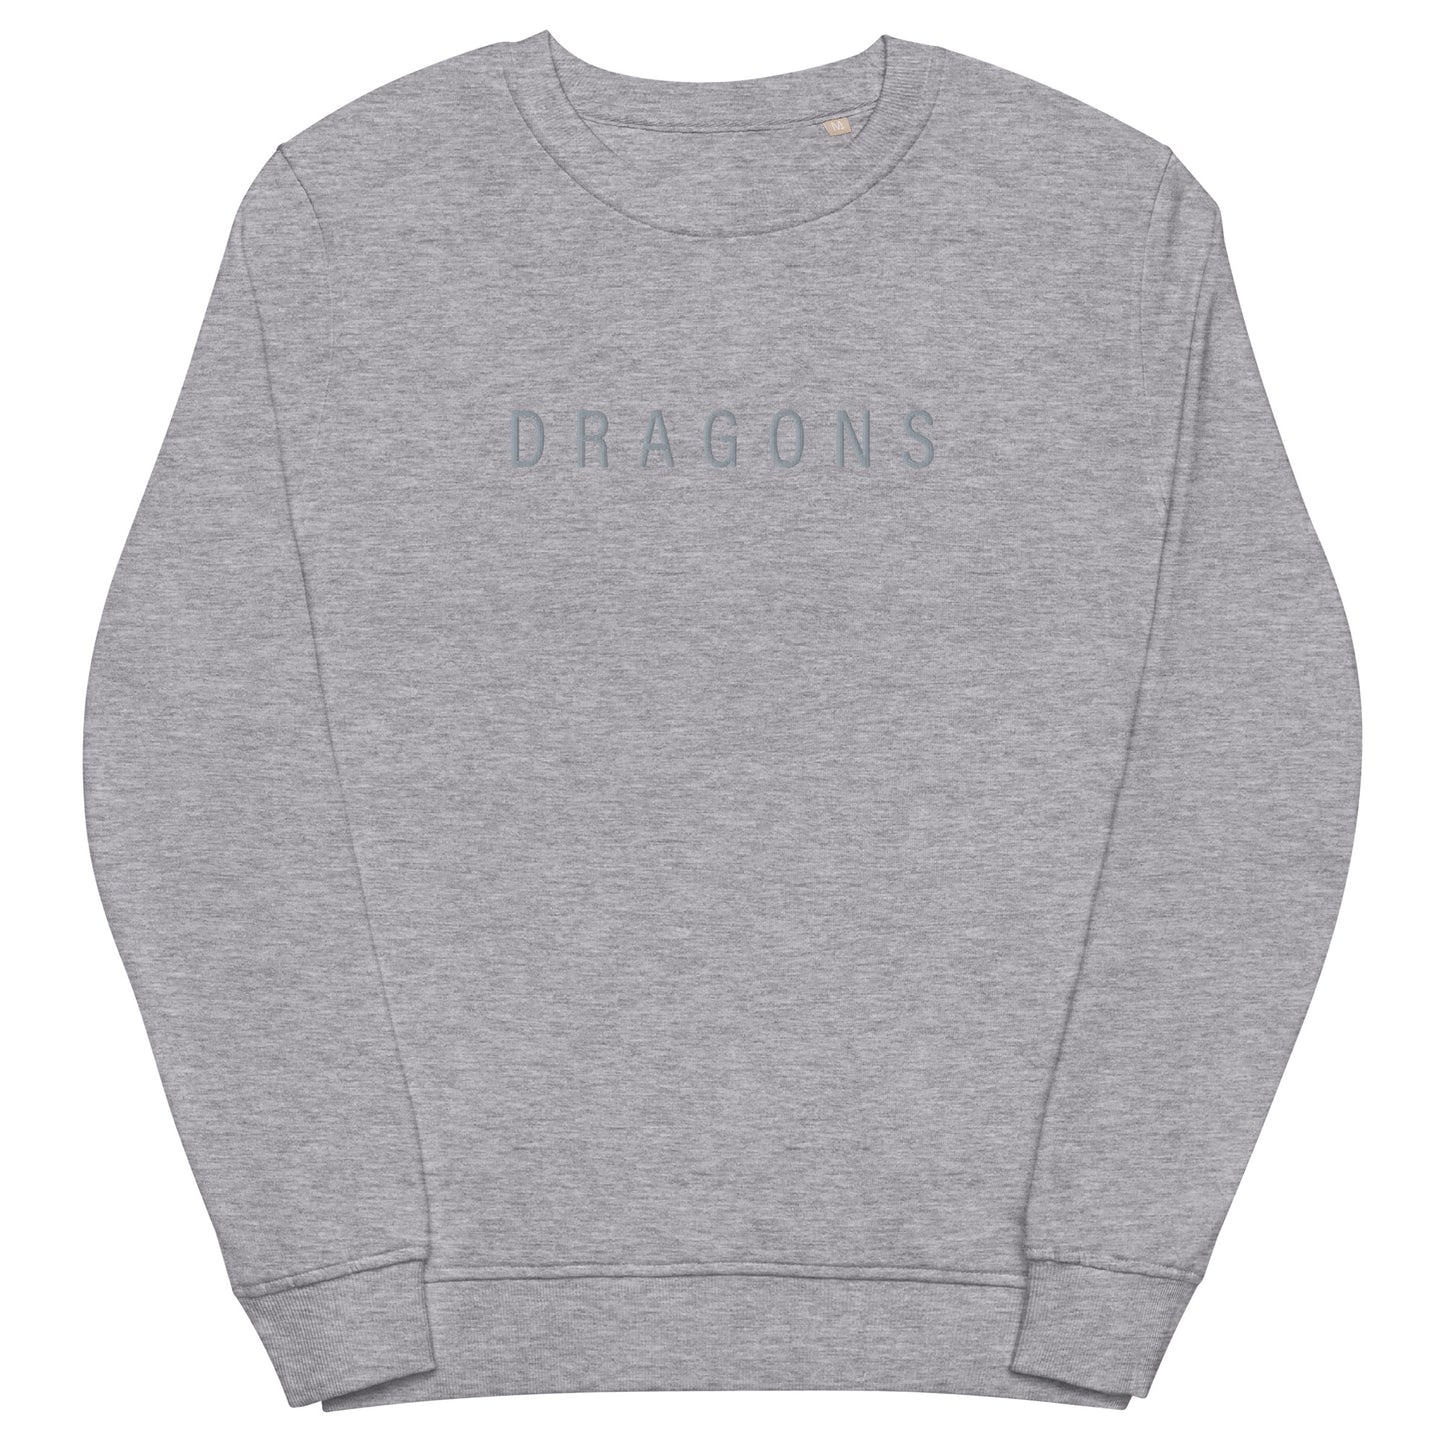 Embroidered Dragons Crew Neck